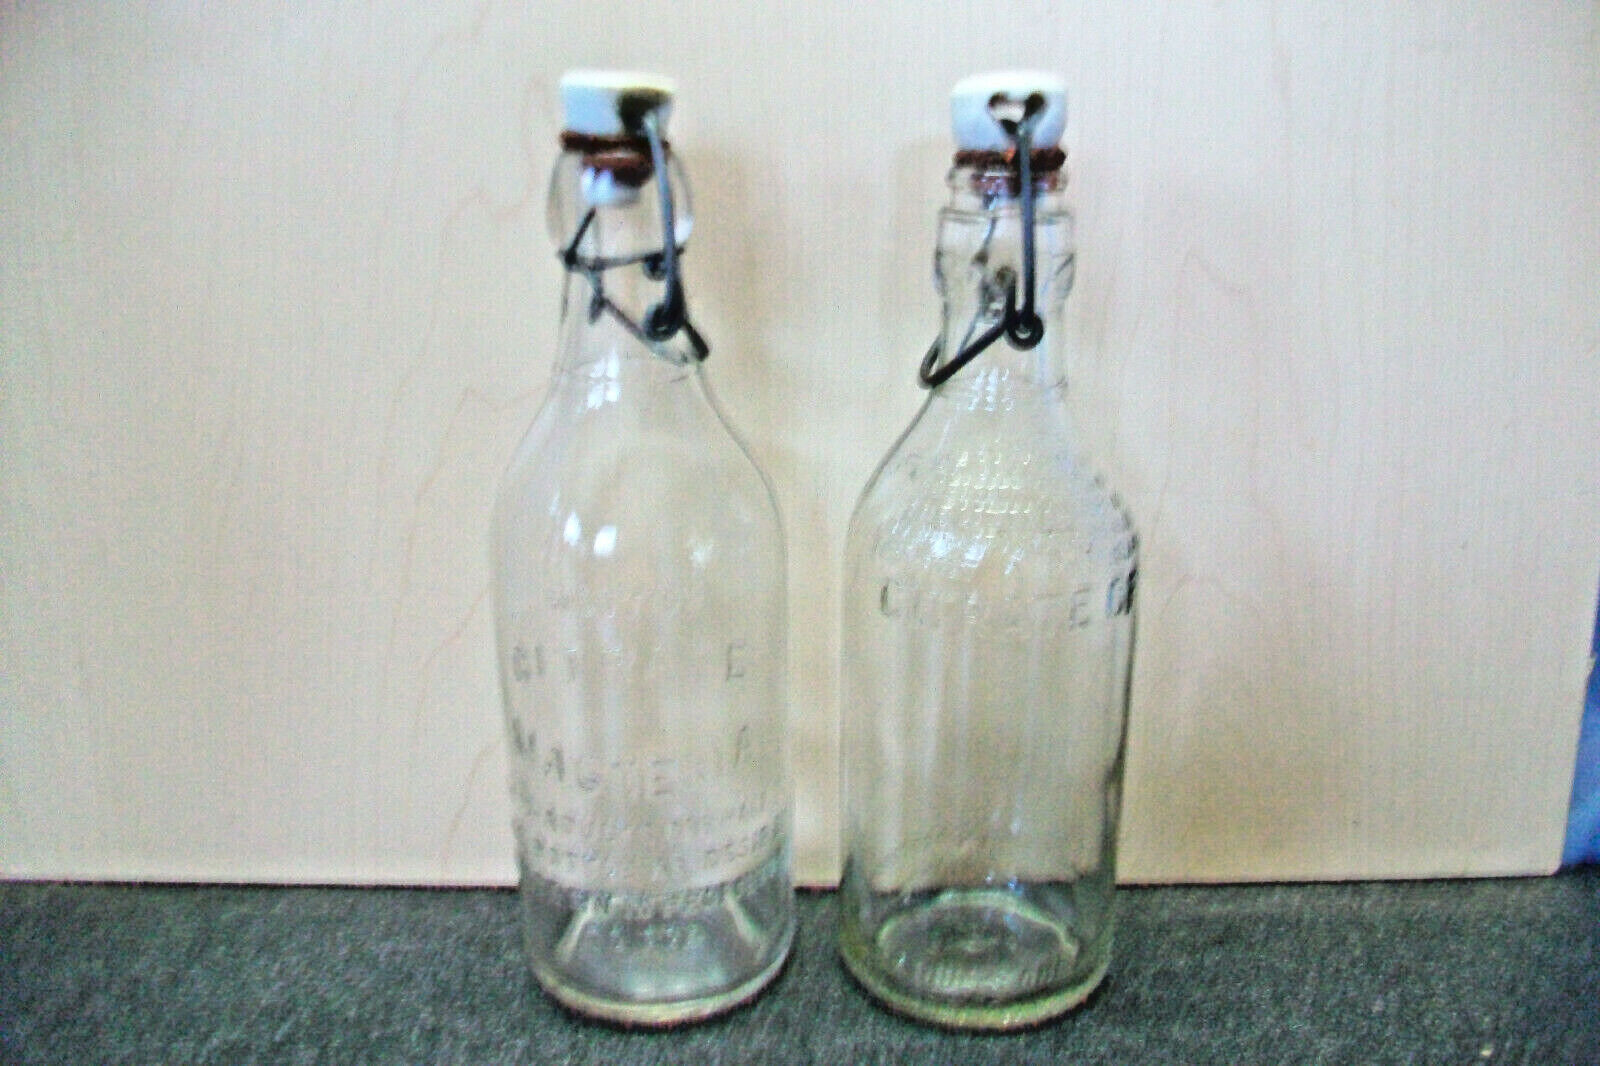 CLEAR GLASS EMBOSSED CITRATE MAGNESIA BOTTLES PORCELAIN WIRE BAIL LID STOPPERS  